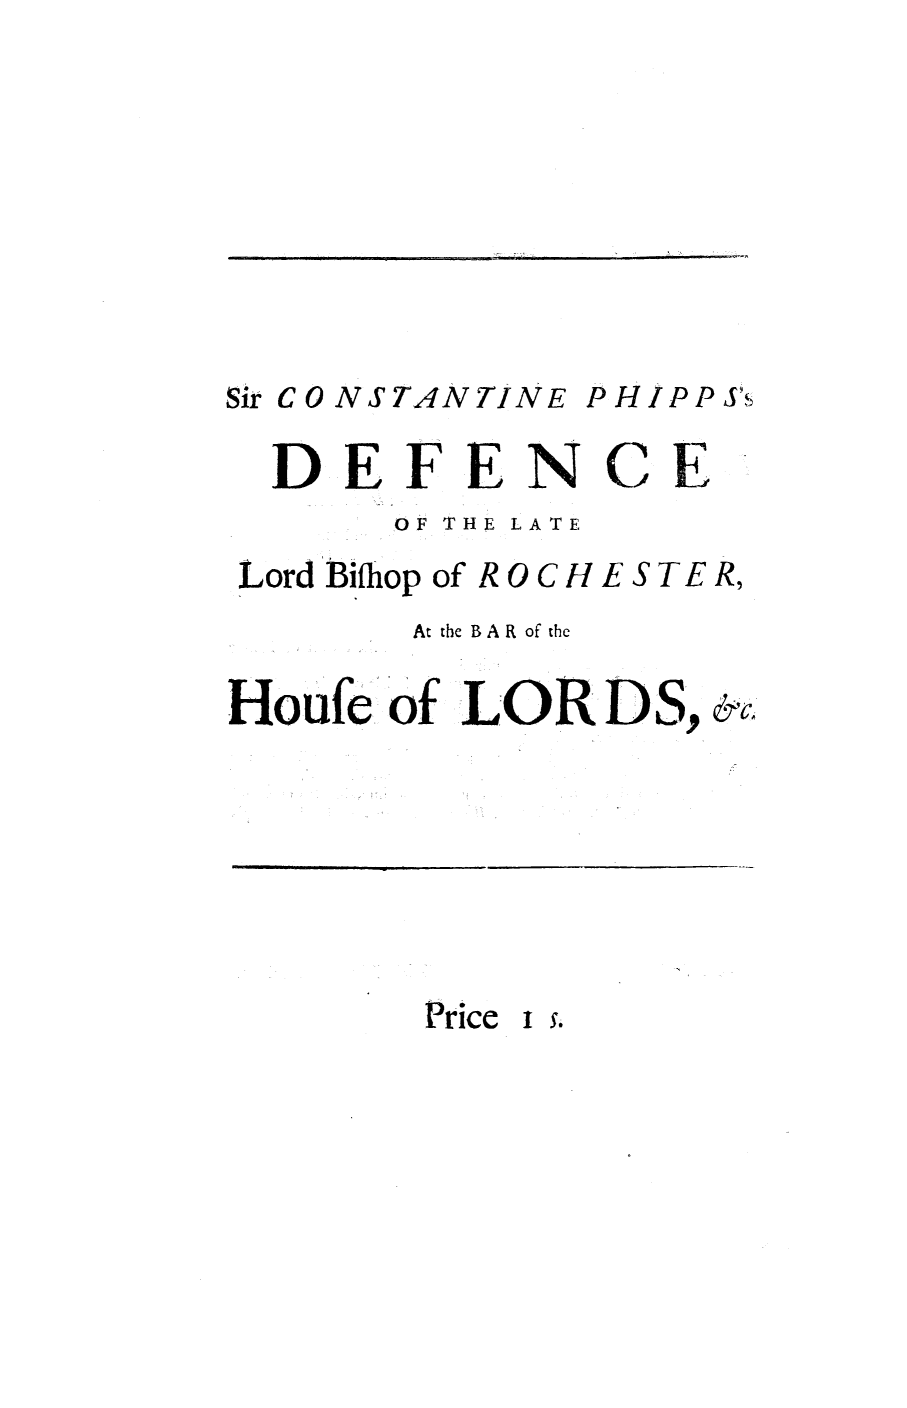 handle is hein.trials/defrhslos0001 and id is 1 raw text is: Sir C 0 NSTANTINE

DEFENCE
OF THE LATE

Lord Bilthop of R 0 C H

ESTER,

At the BAR of the
Houfe of LORDS, &c

Price

I se

]                        I

PHippJ~s


